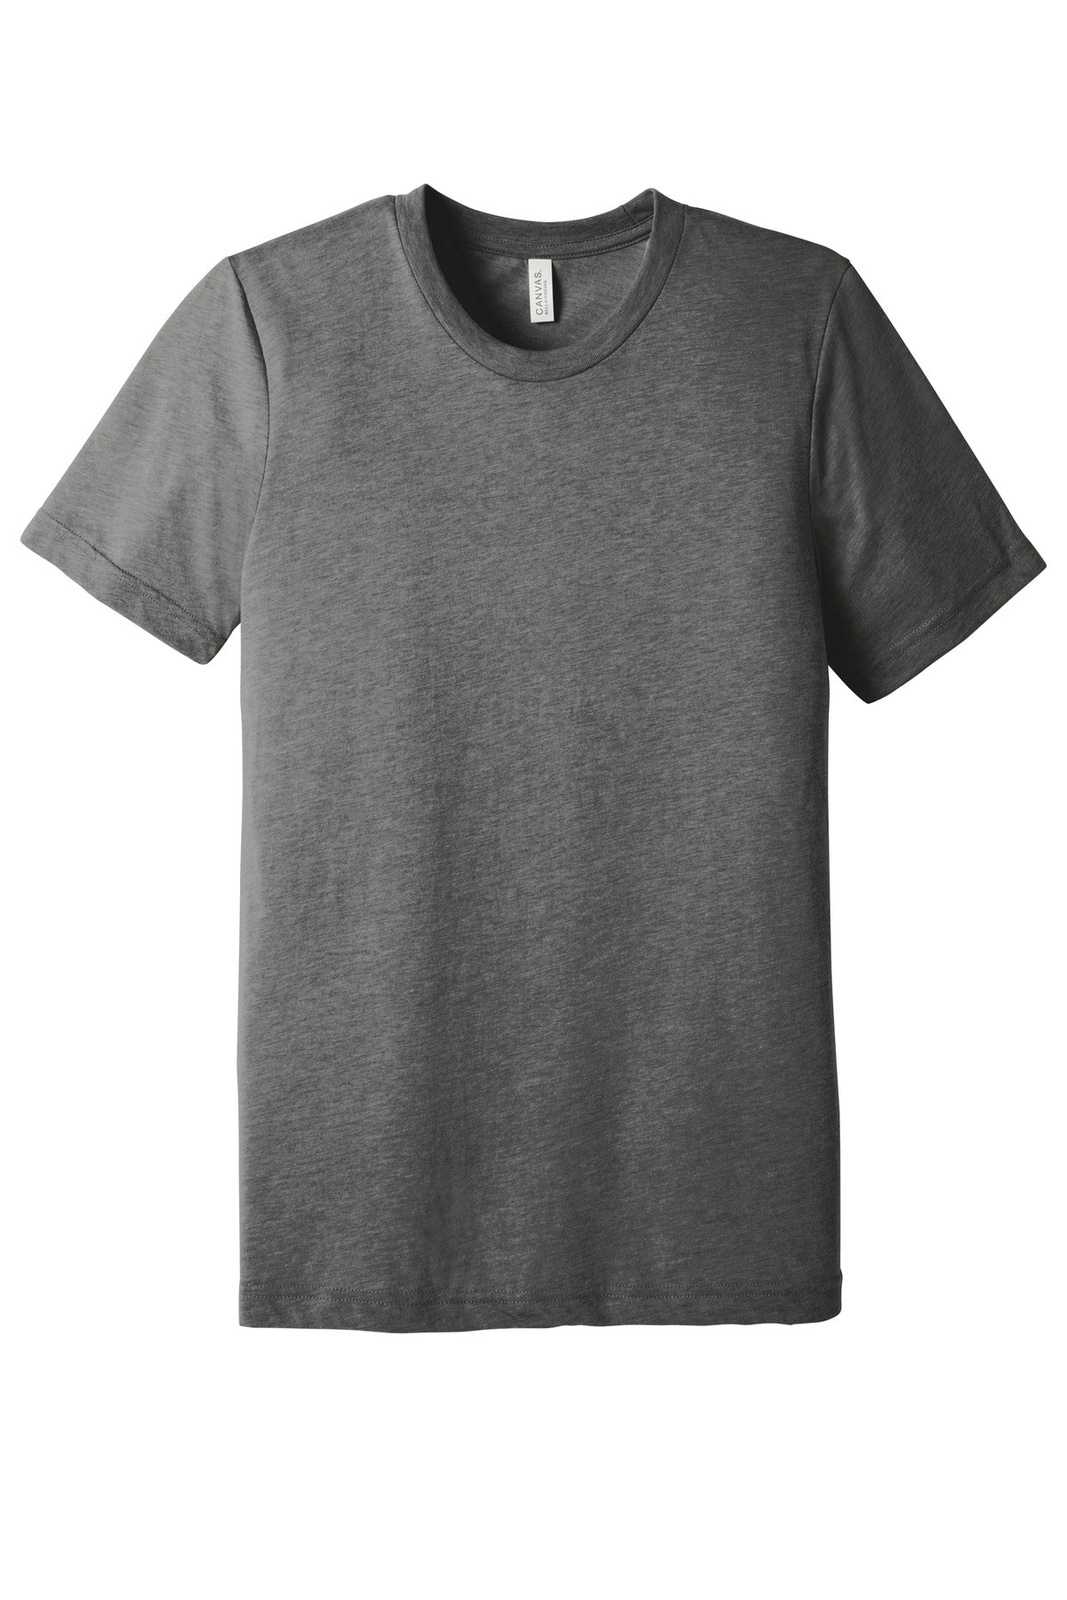 Bella + Canvas 3413 Unisex Triblend Short Sleeve Tee - Gray Triblend - HIT a Double